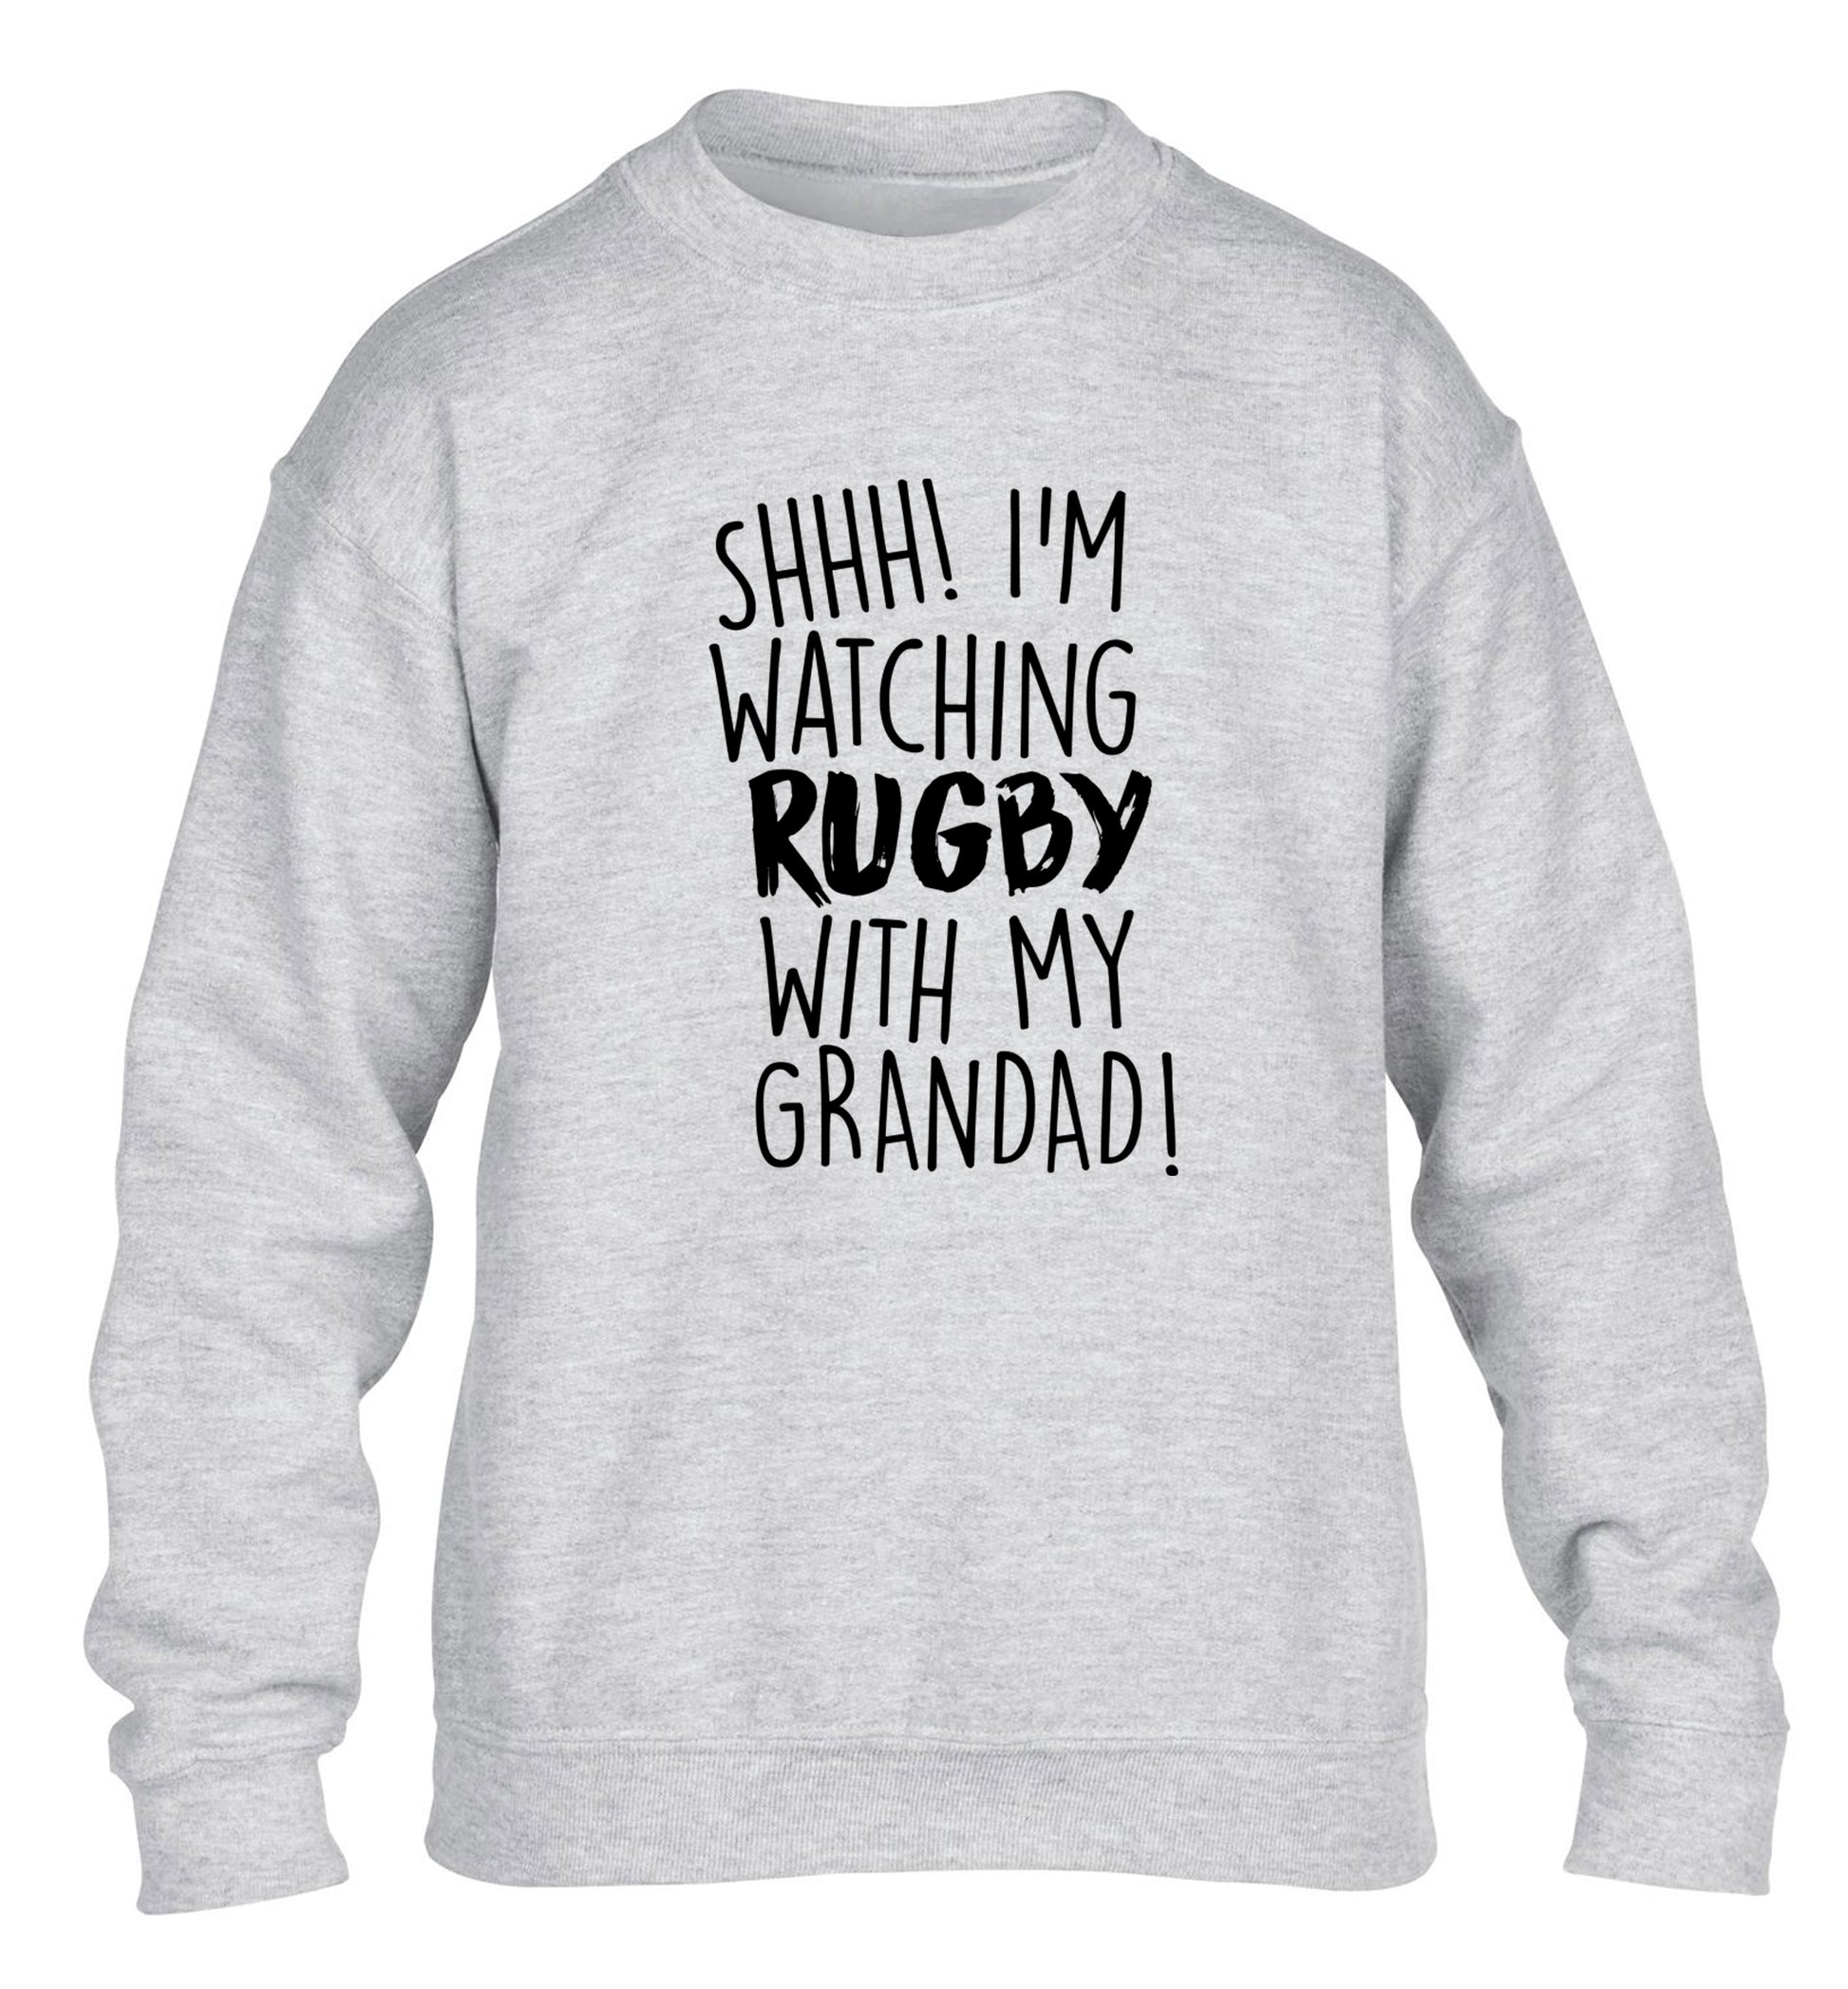 Shh I'm watching rugby with my grandaughter children's grey sweater 12-13 Years